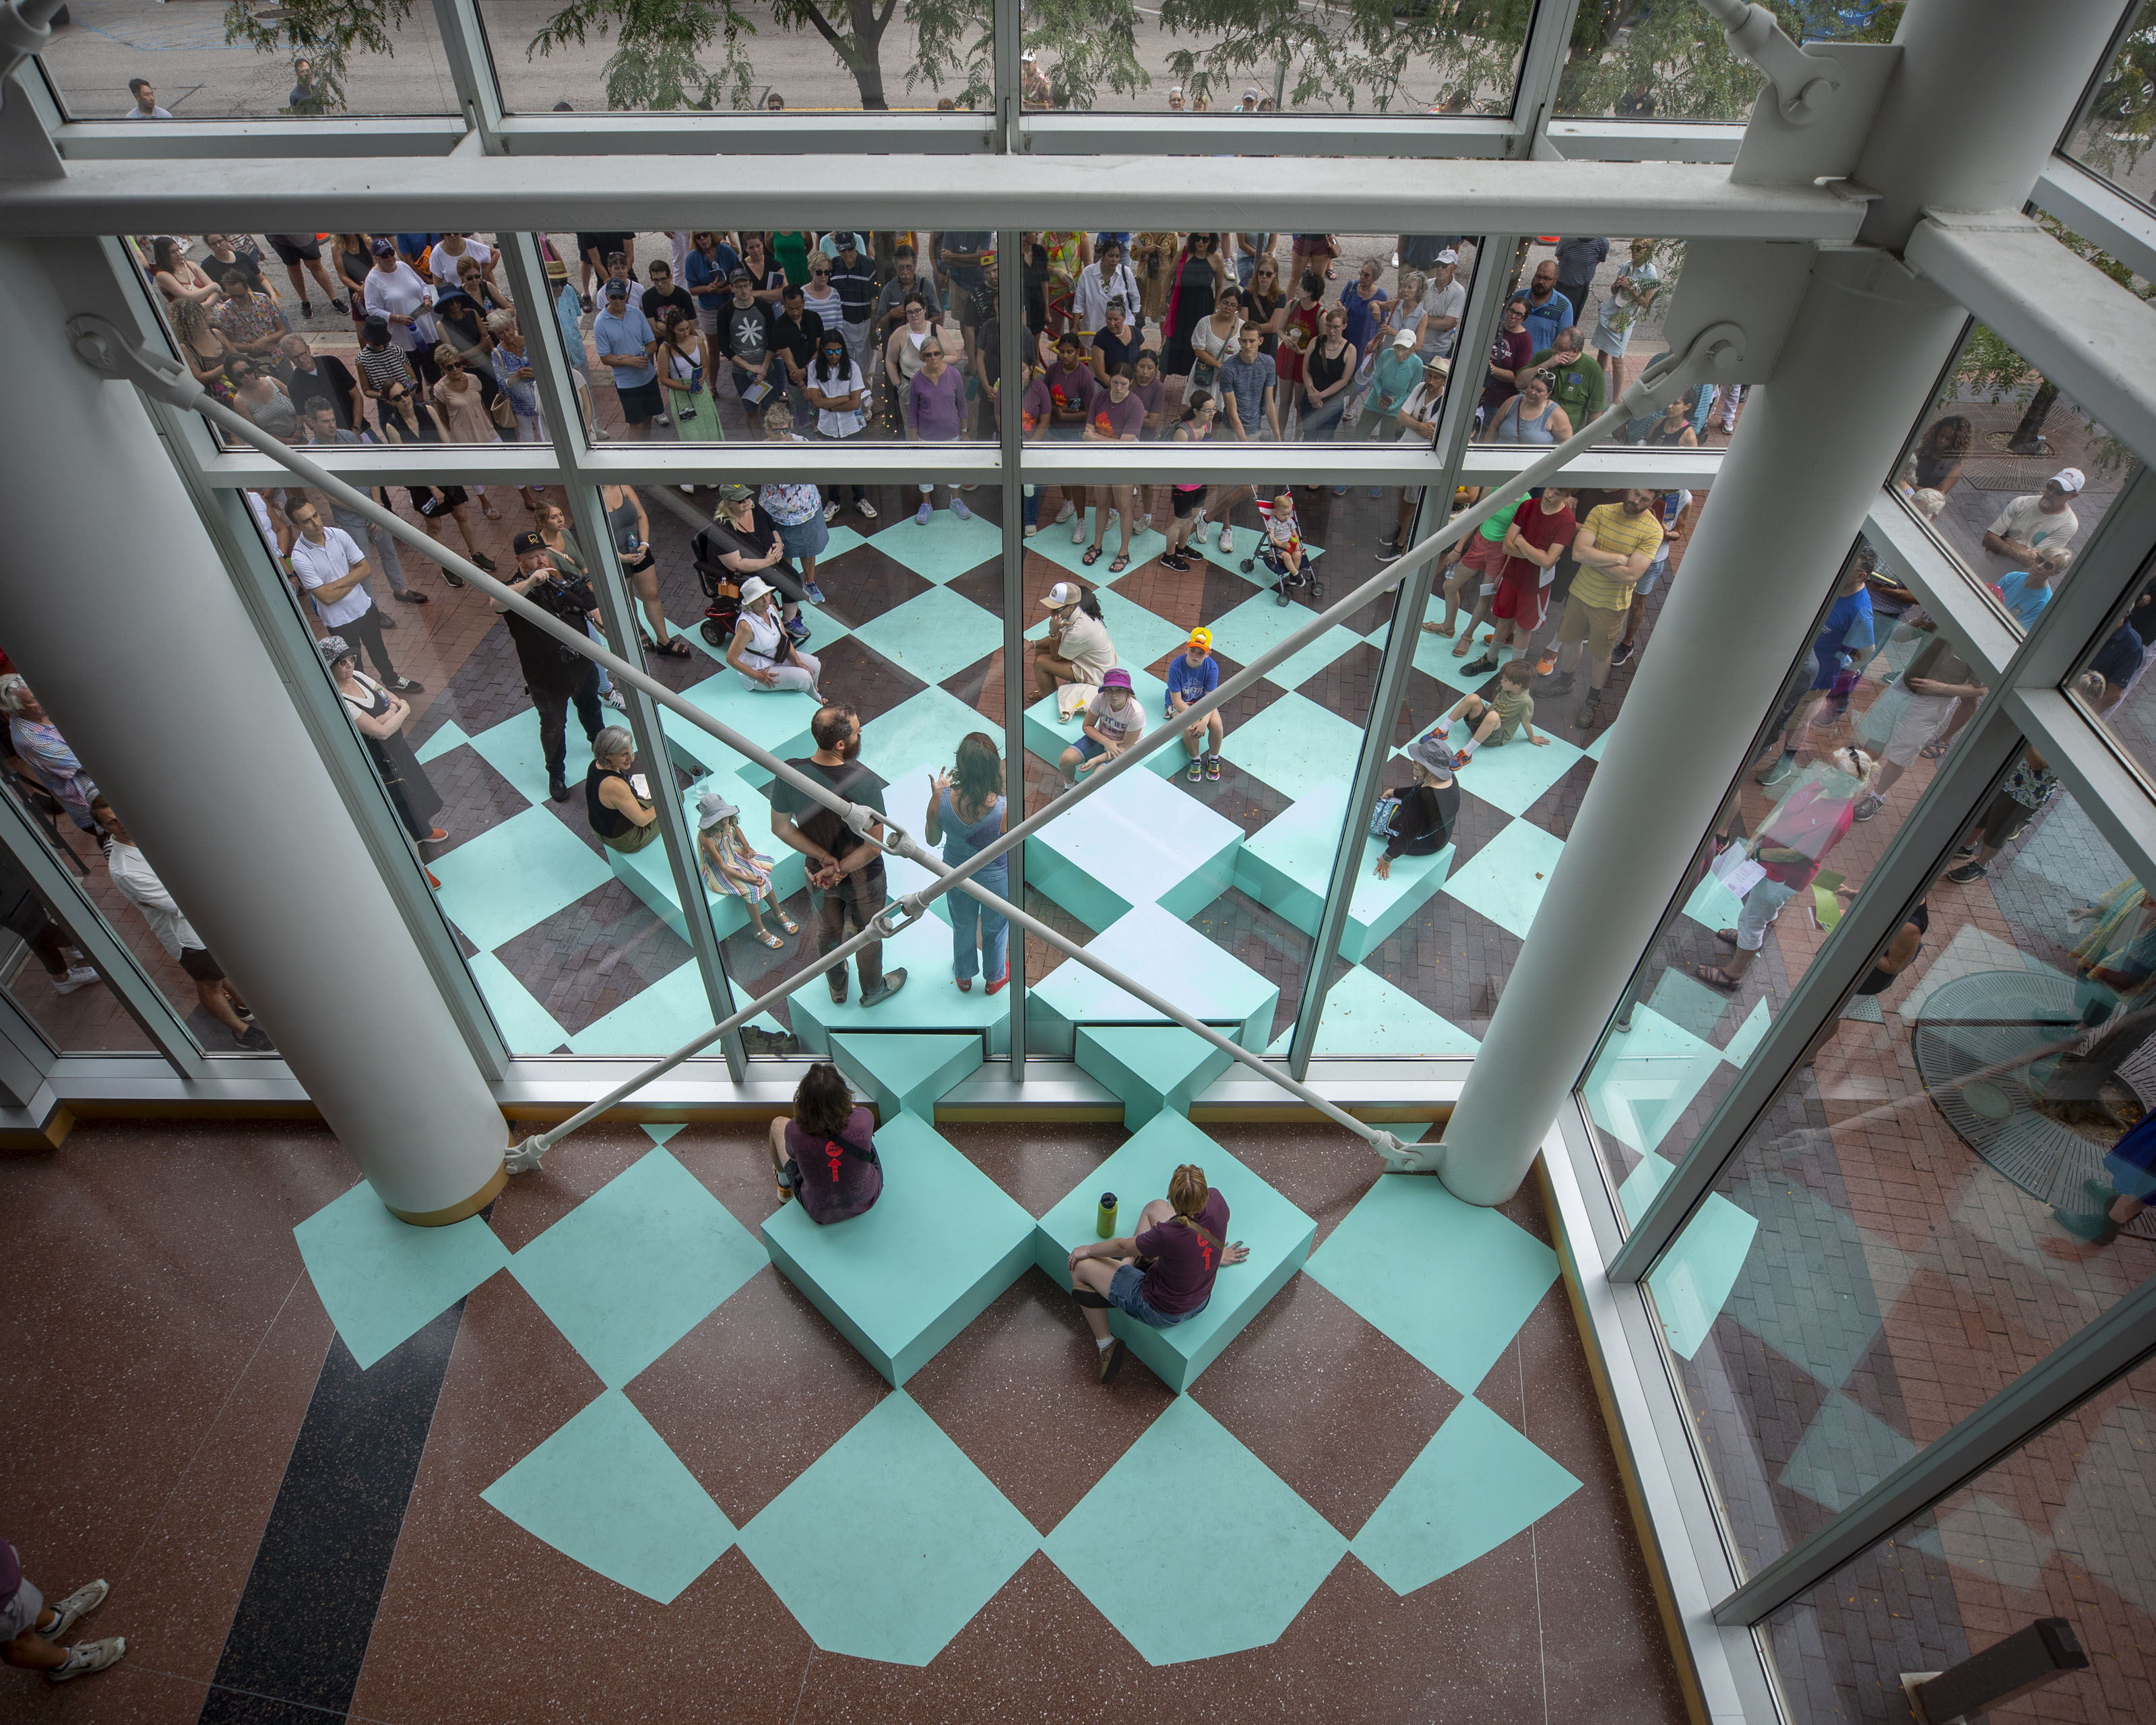 The image shows an indoor space with a large window overlooking an outdoor area. The outdoor space features a checkered pattern of light blue squares, creating a visual effect similar to a giant chessboard. Some of the squares are elevated into platforms, which people are sitting on. There are also a large number of people gathered outside the window, seemingly observing what's happening below. The indoor space appears to be a lobby or atrium, with a patterned floor of brown and light blue tiles. The image is taken from a high vantage point, looking down at the scene.